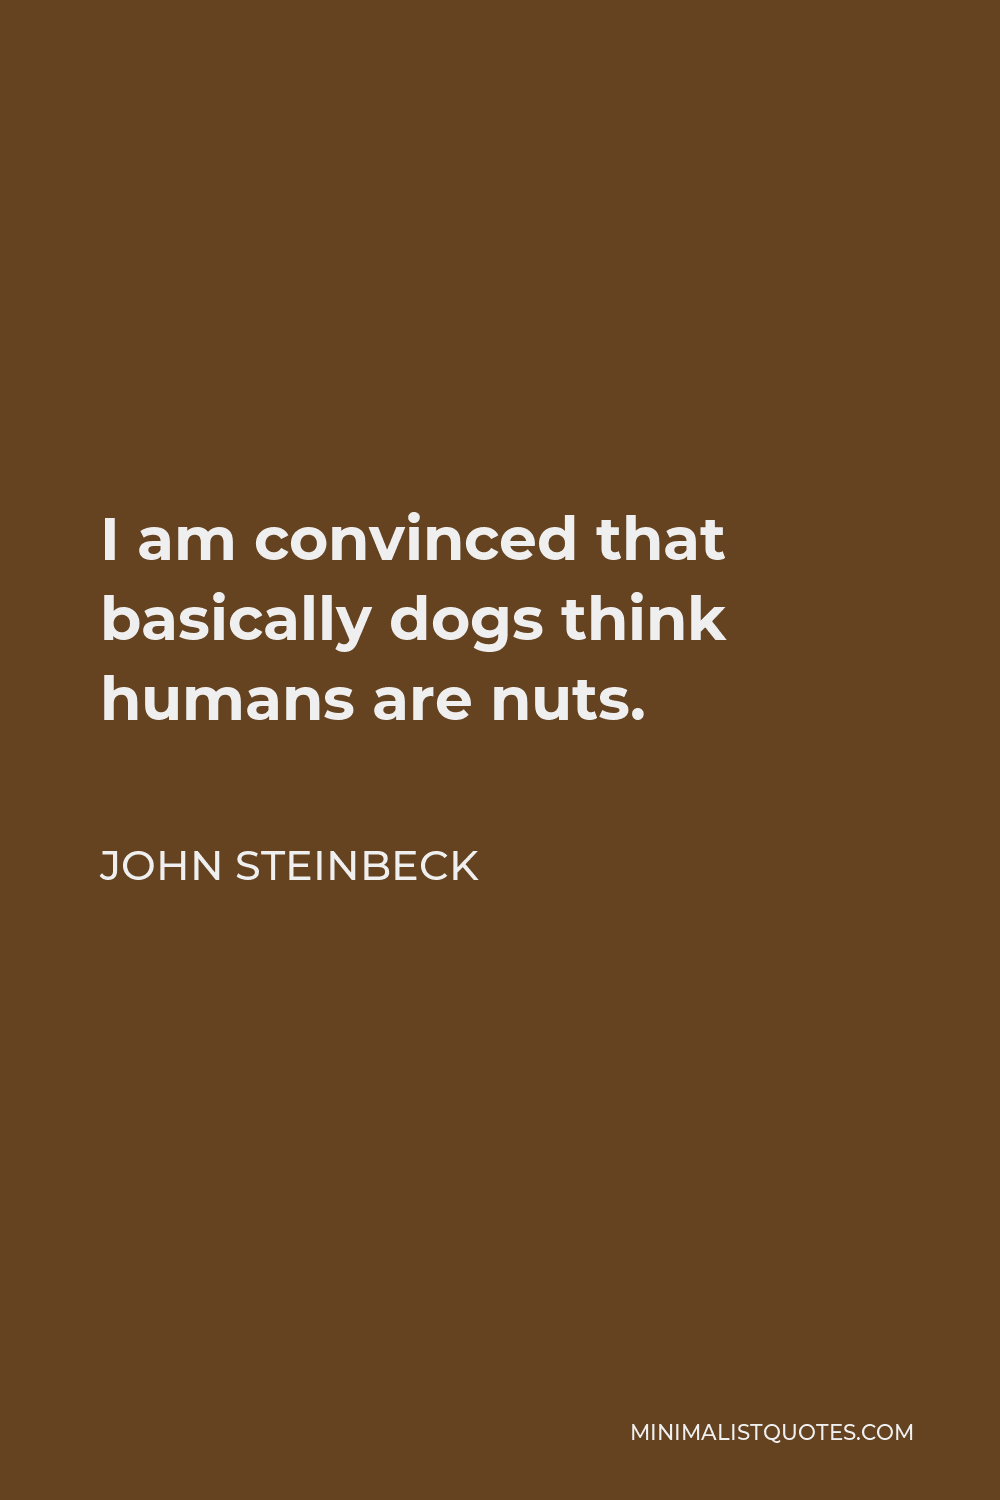 John Steinbeck Quote - I am convinced that basically dogs think humans are nuts.